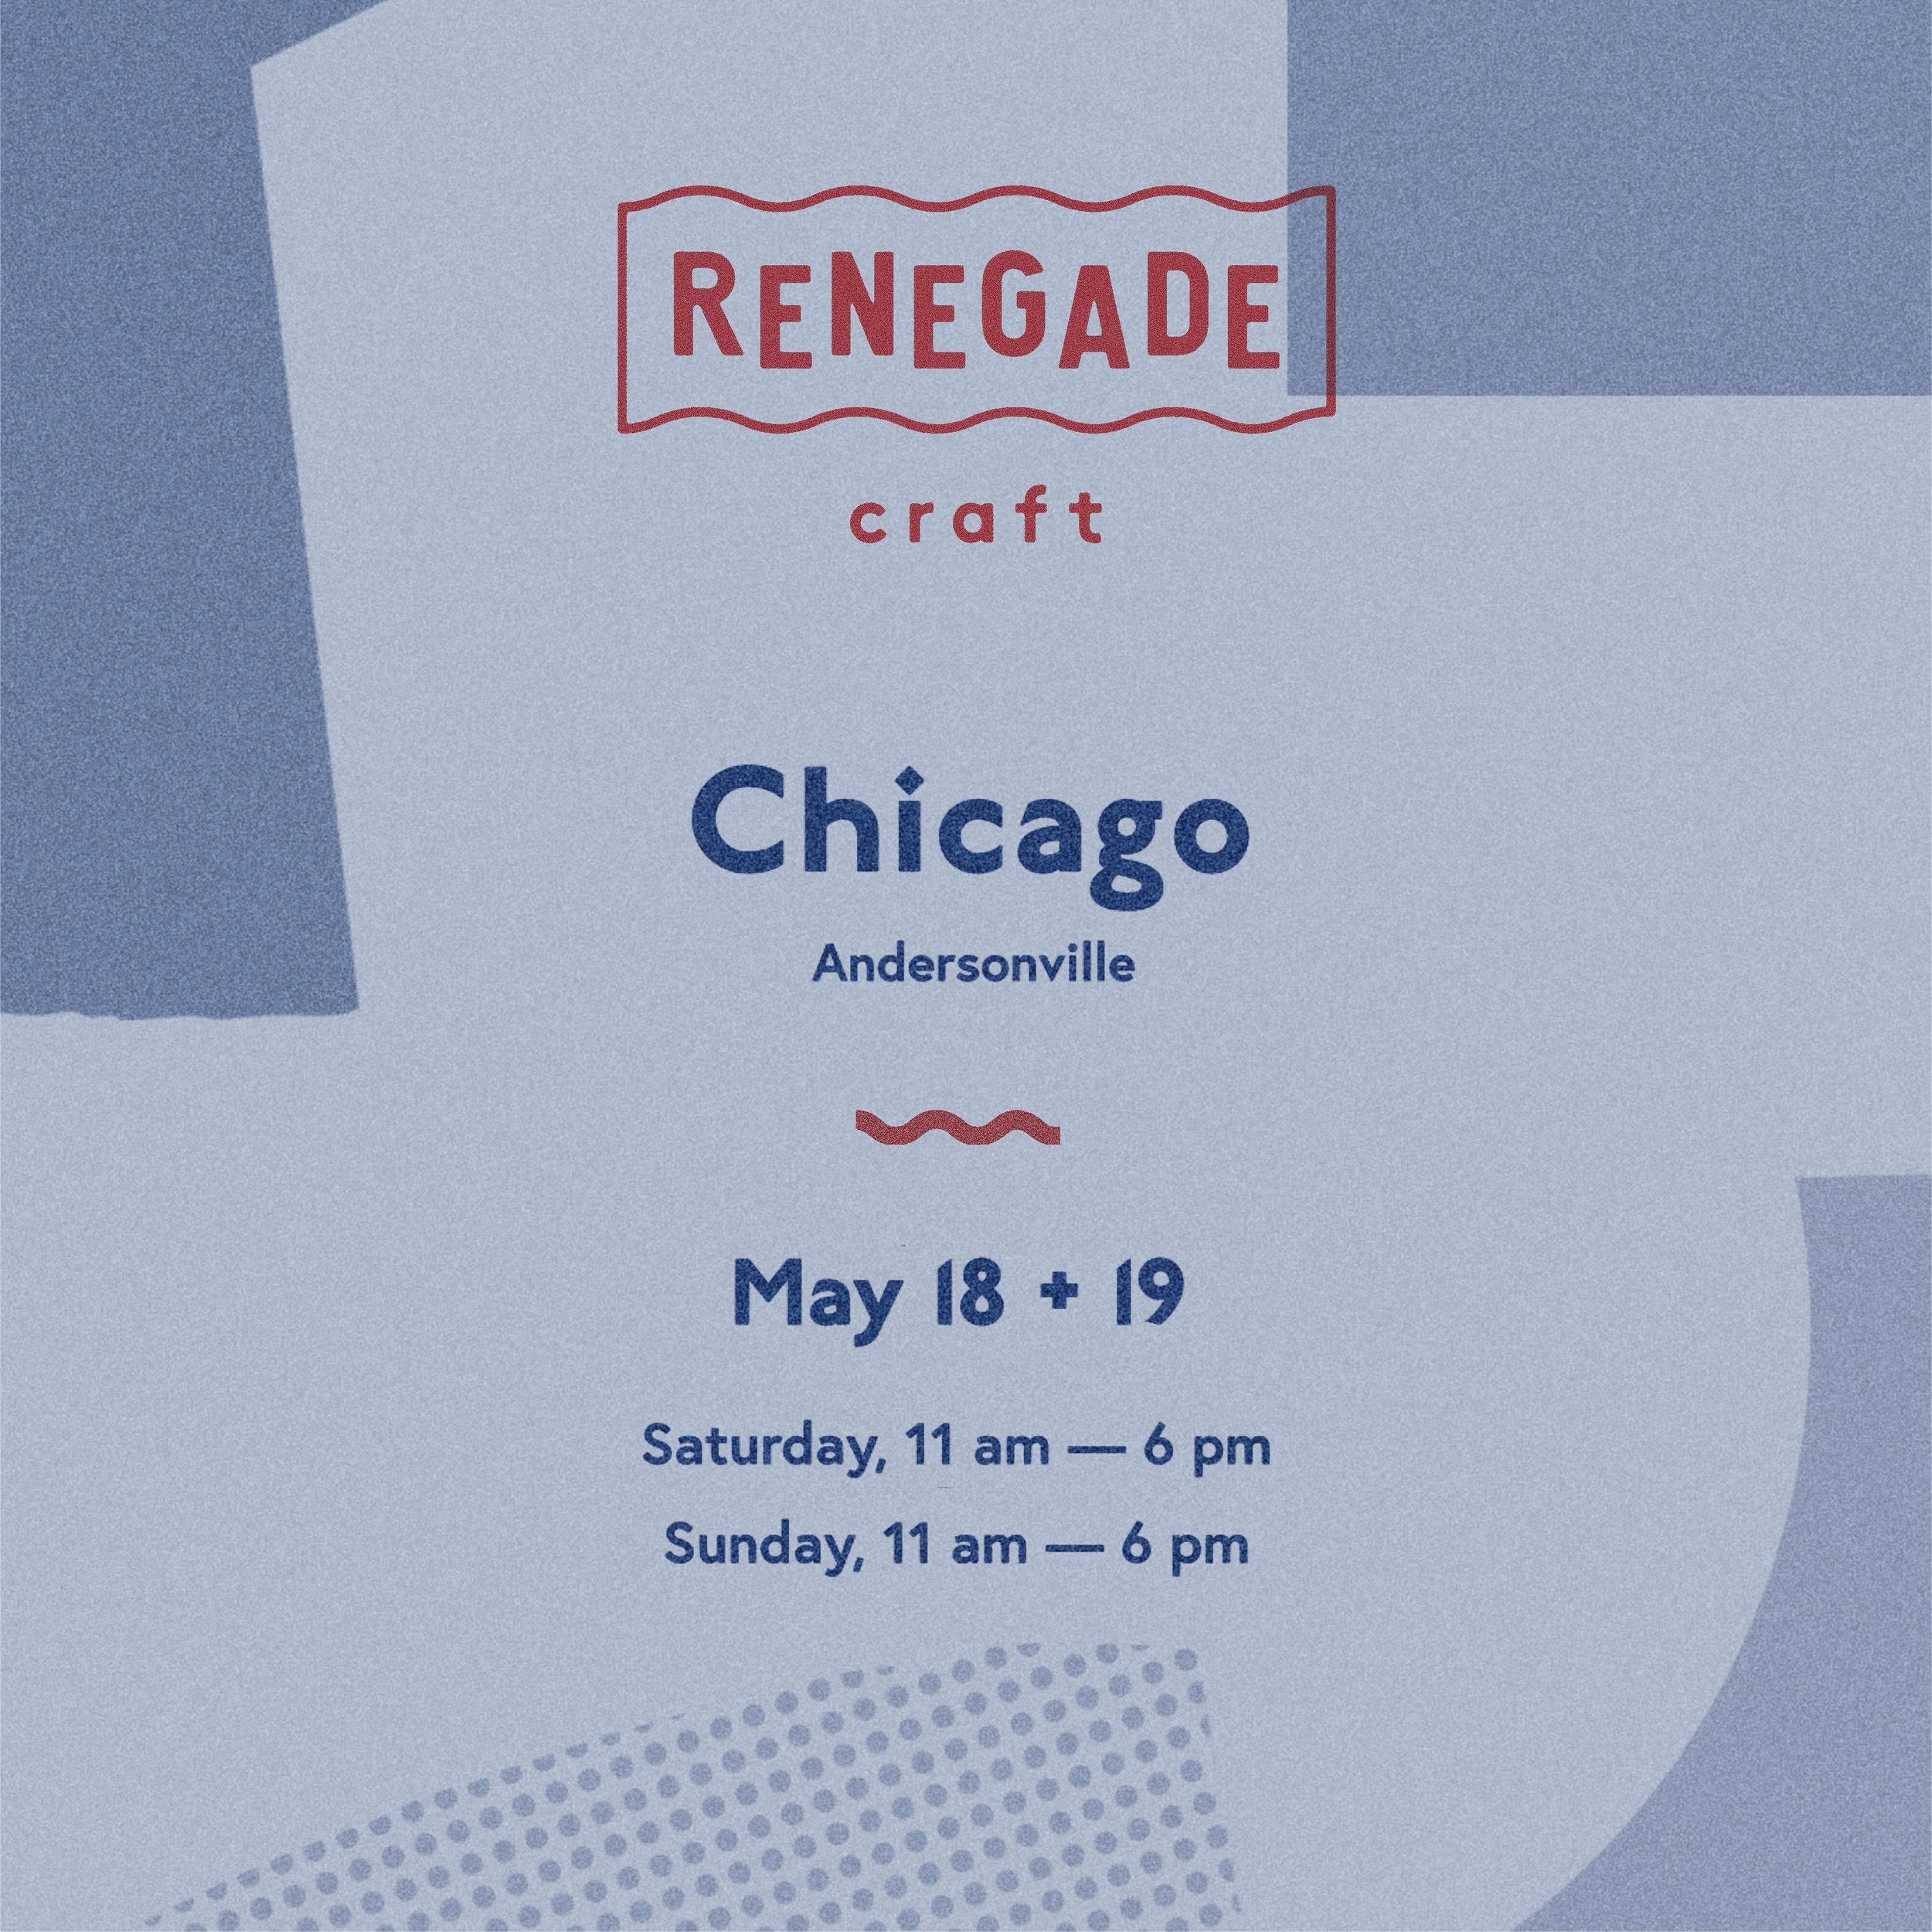 Come find Manual al fresco at @renegadecraft this weekend in Chicago. We&rsquo;ll have the glassware you know and love PLUS prototypes of new products! (3 different products if I can get my shit together) Even if you&rsquo;re not shopping, come strol